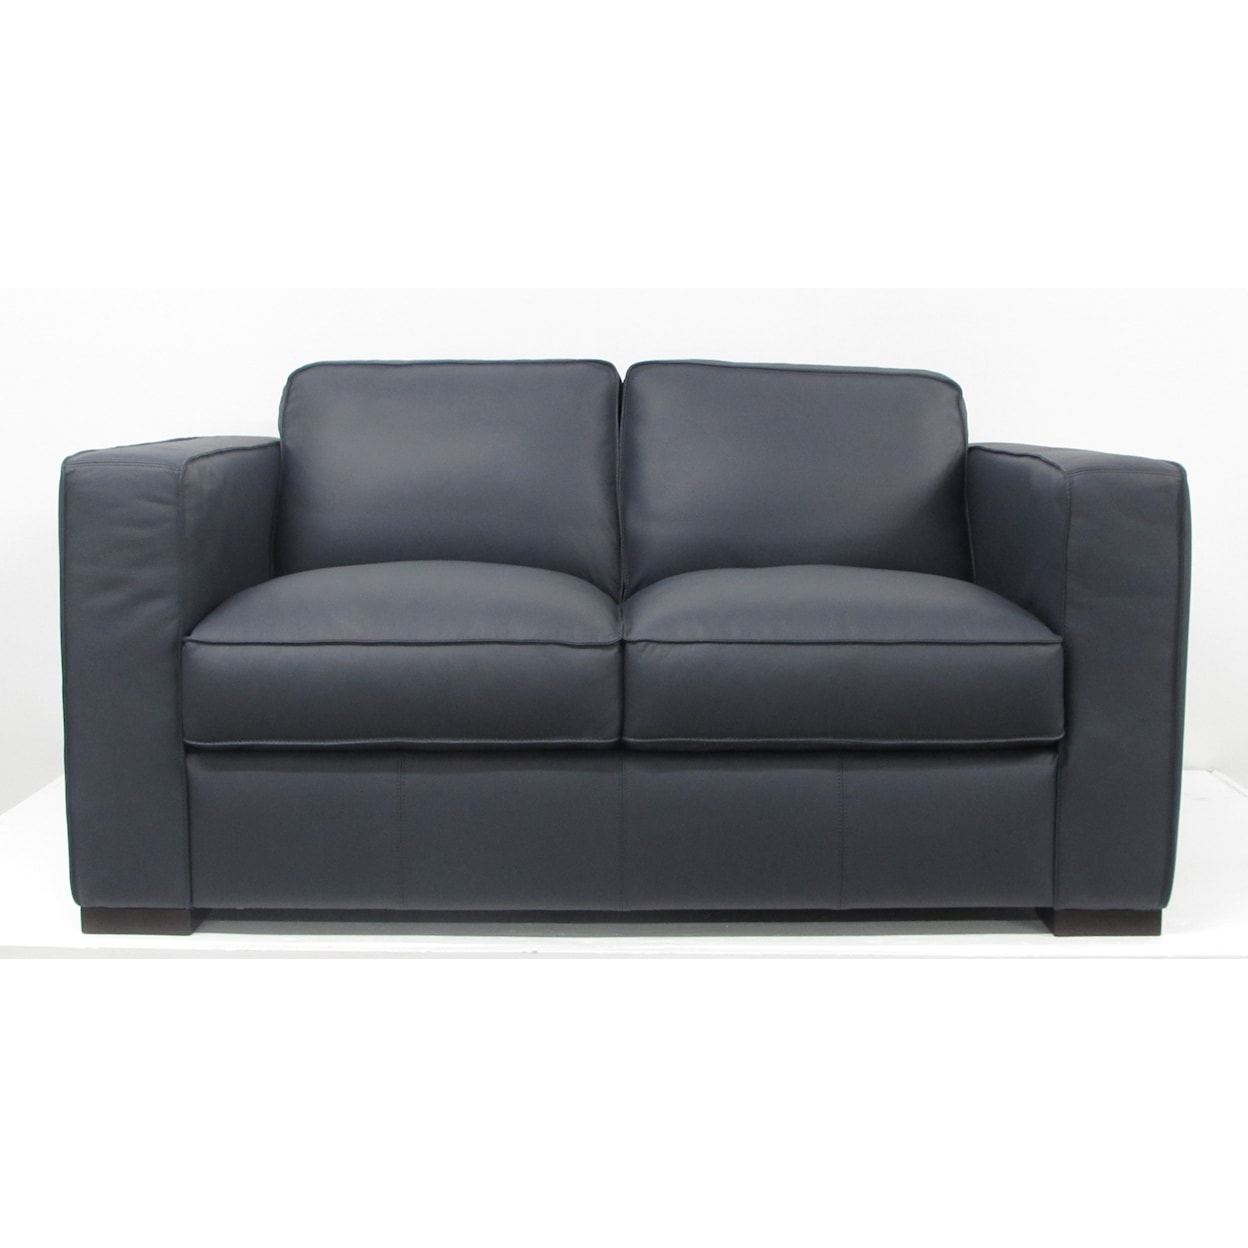 Natuzzi Editions C274 Leather Collection C274 Navy Leather Loveseat